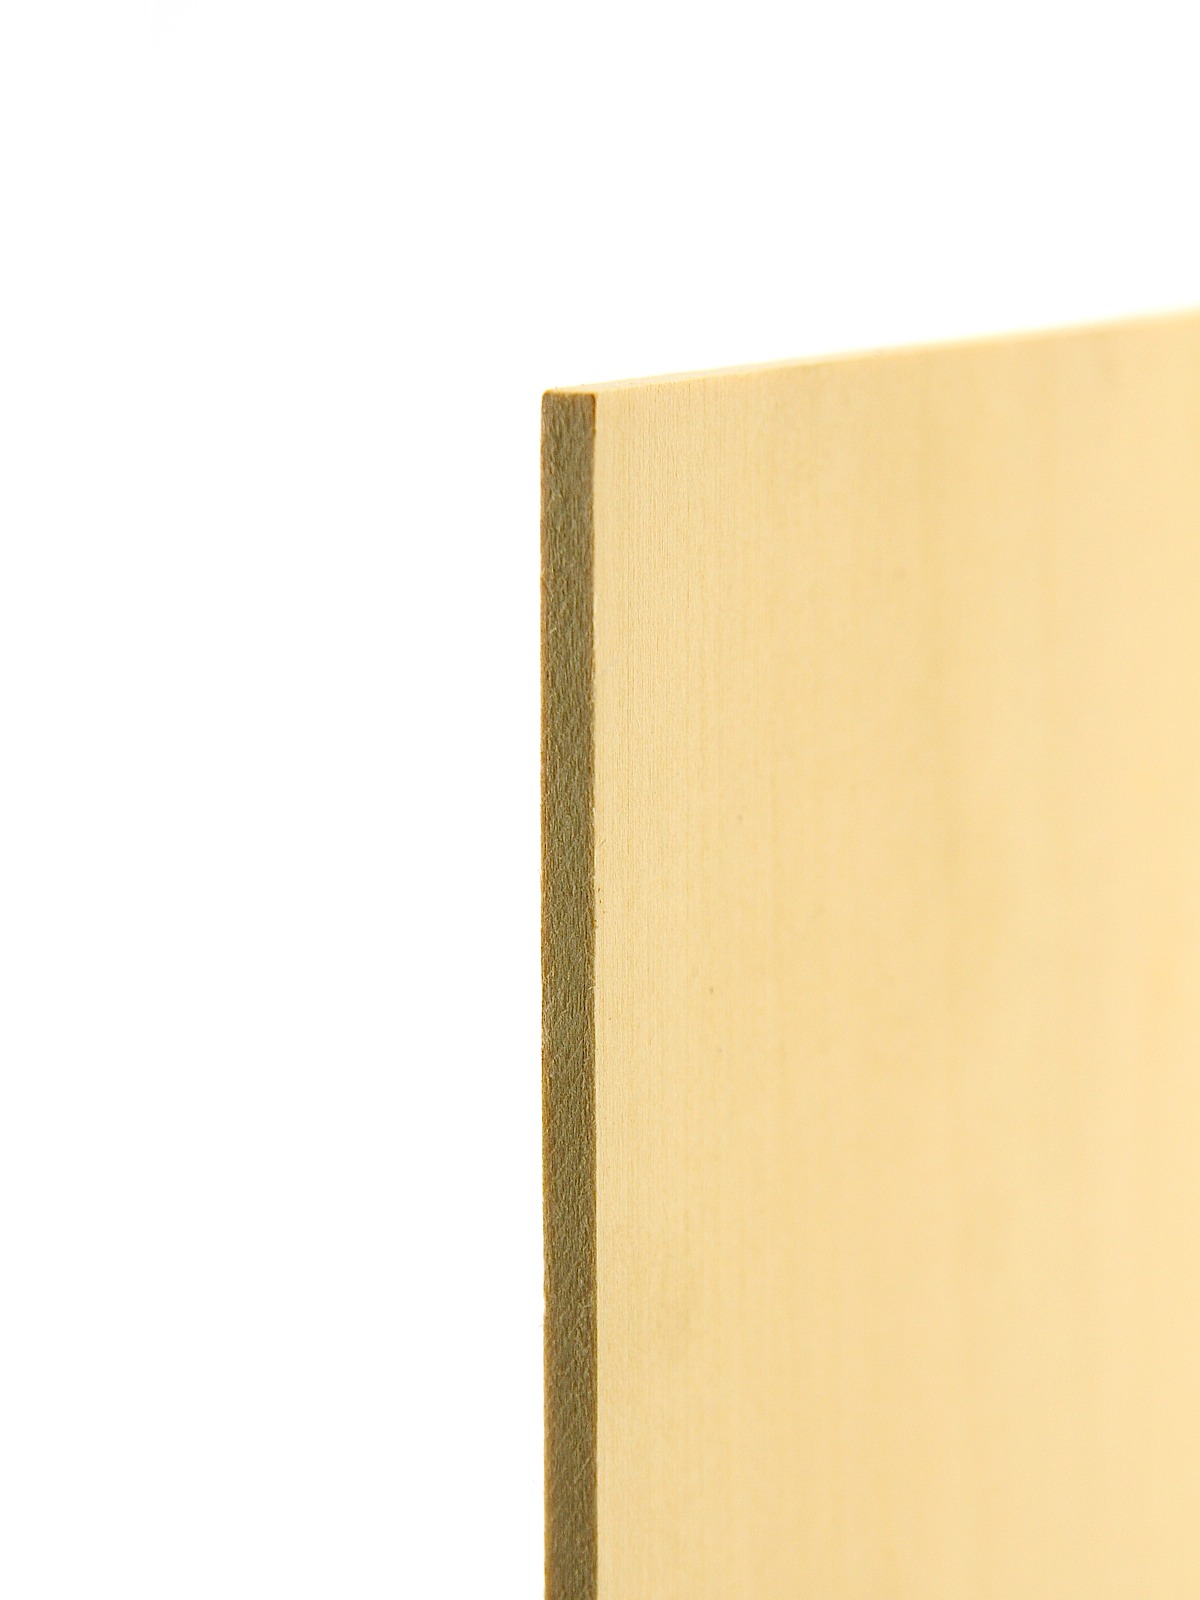 Basswood Sheets 3 16 In. 8 In. X 24 In.